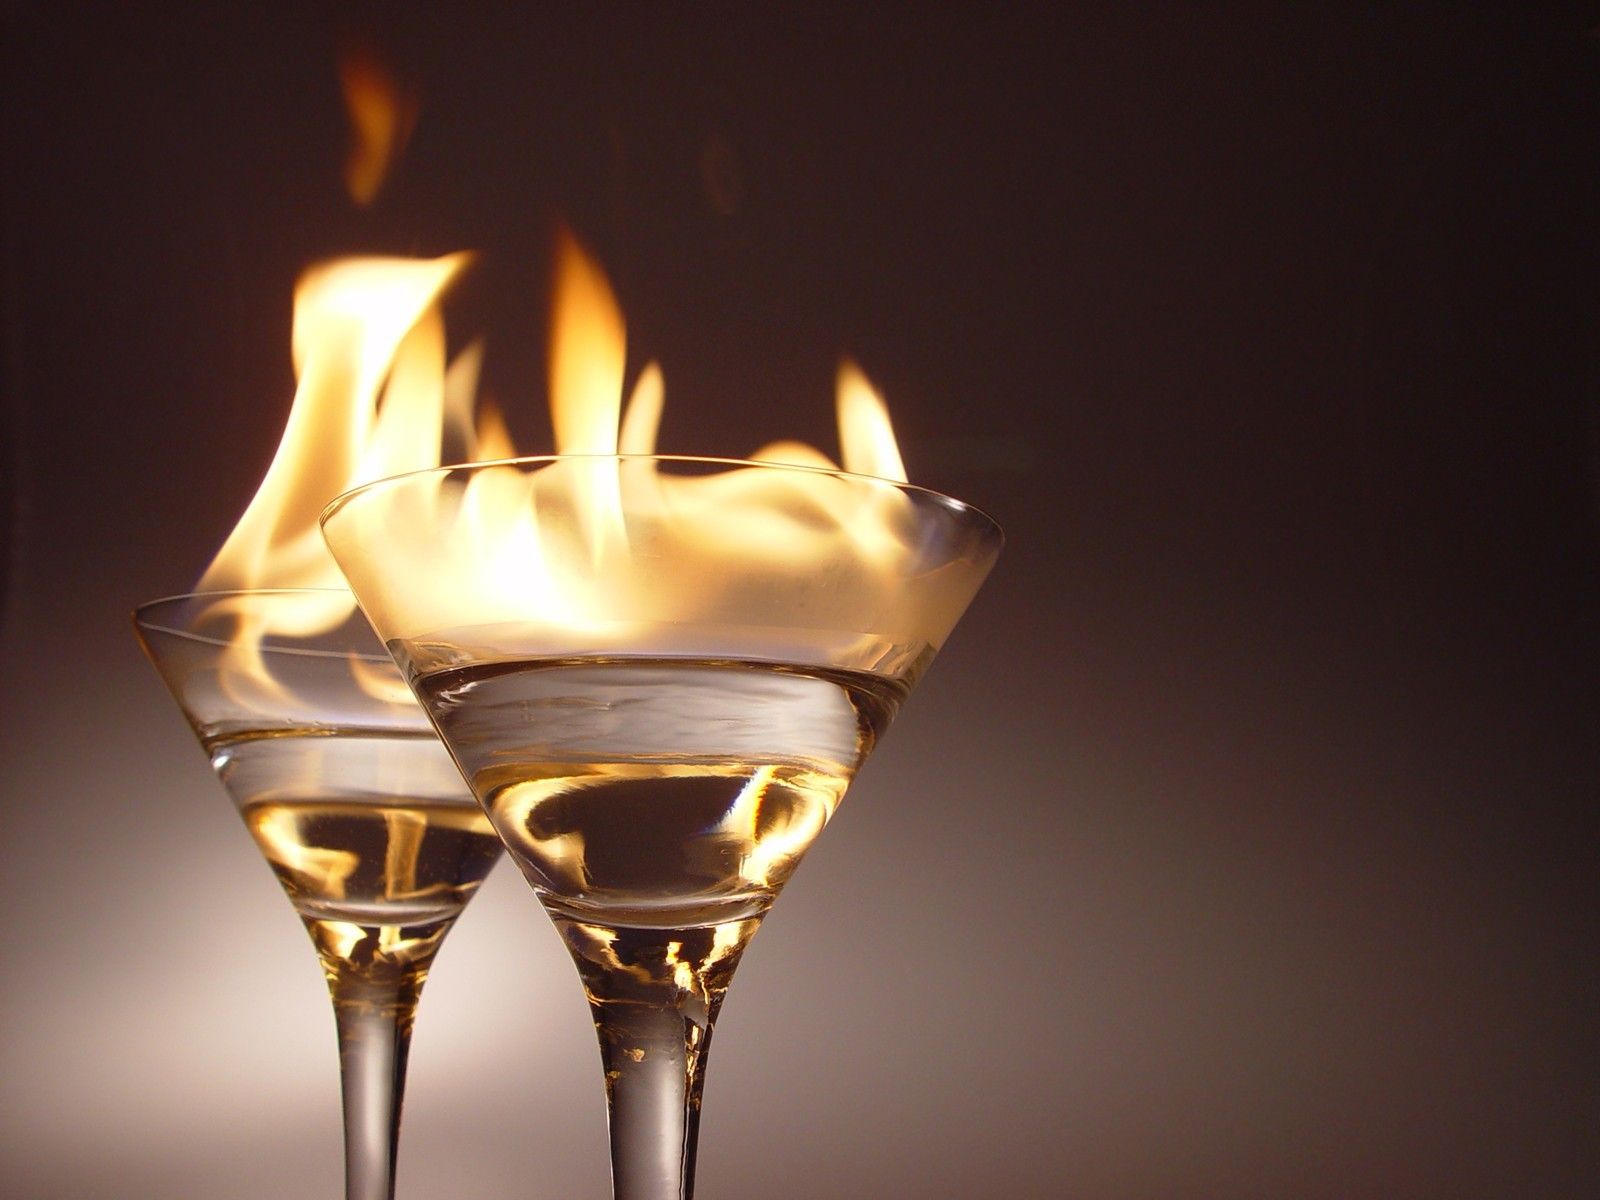 Flames fire glasses alcohol wine champagne wallpaper ...